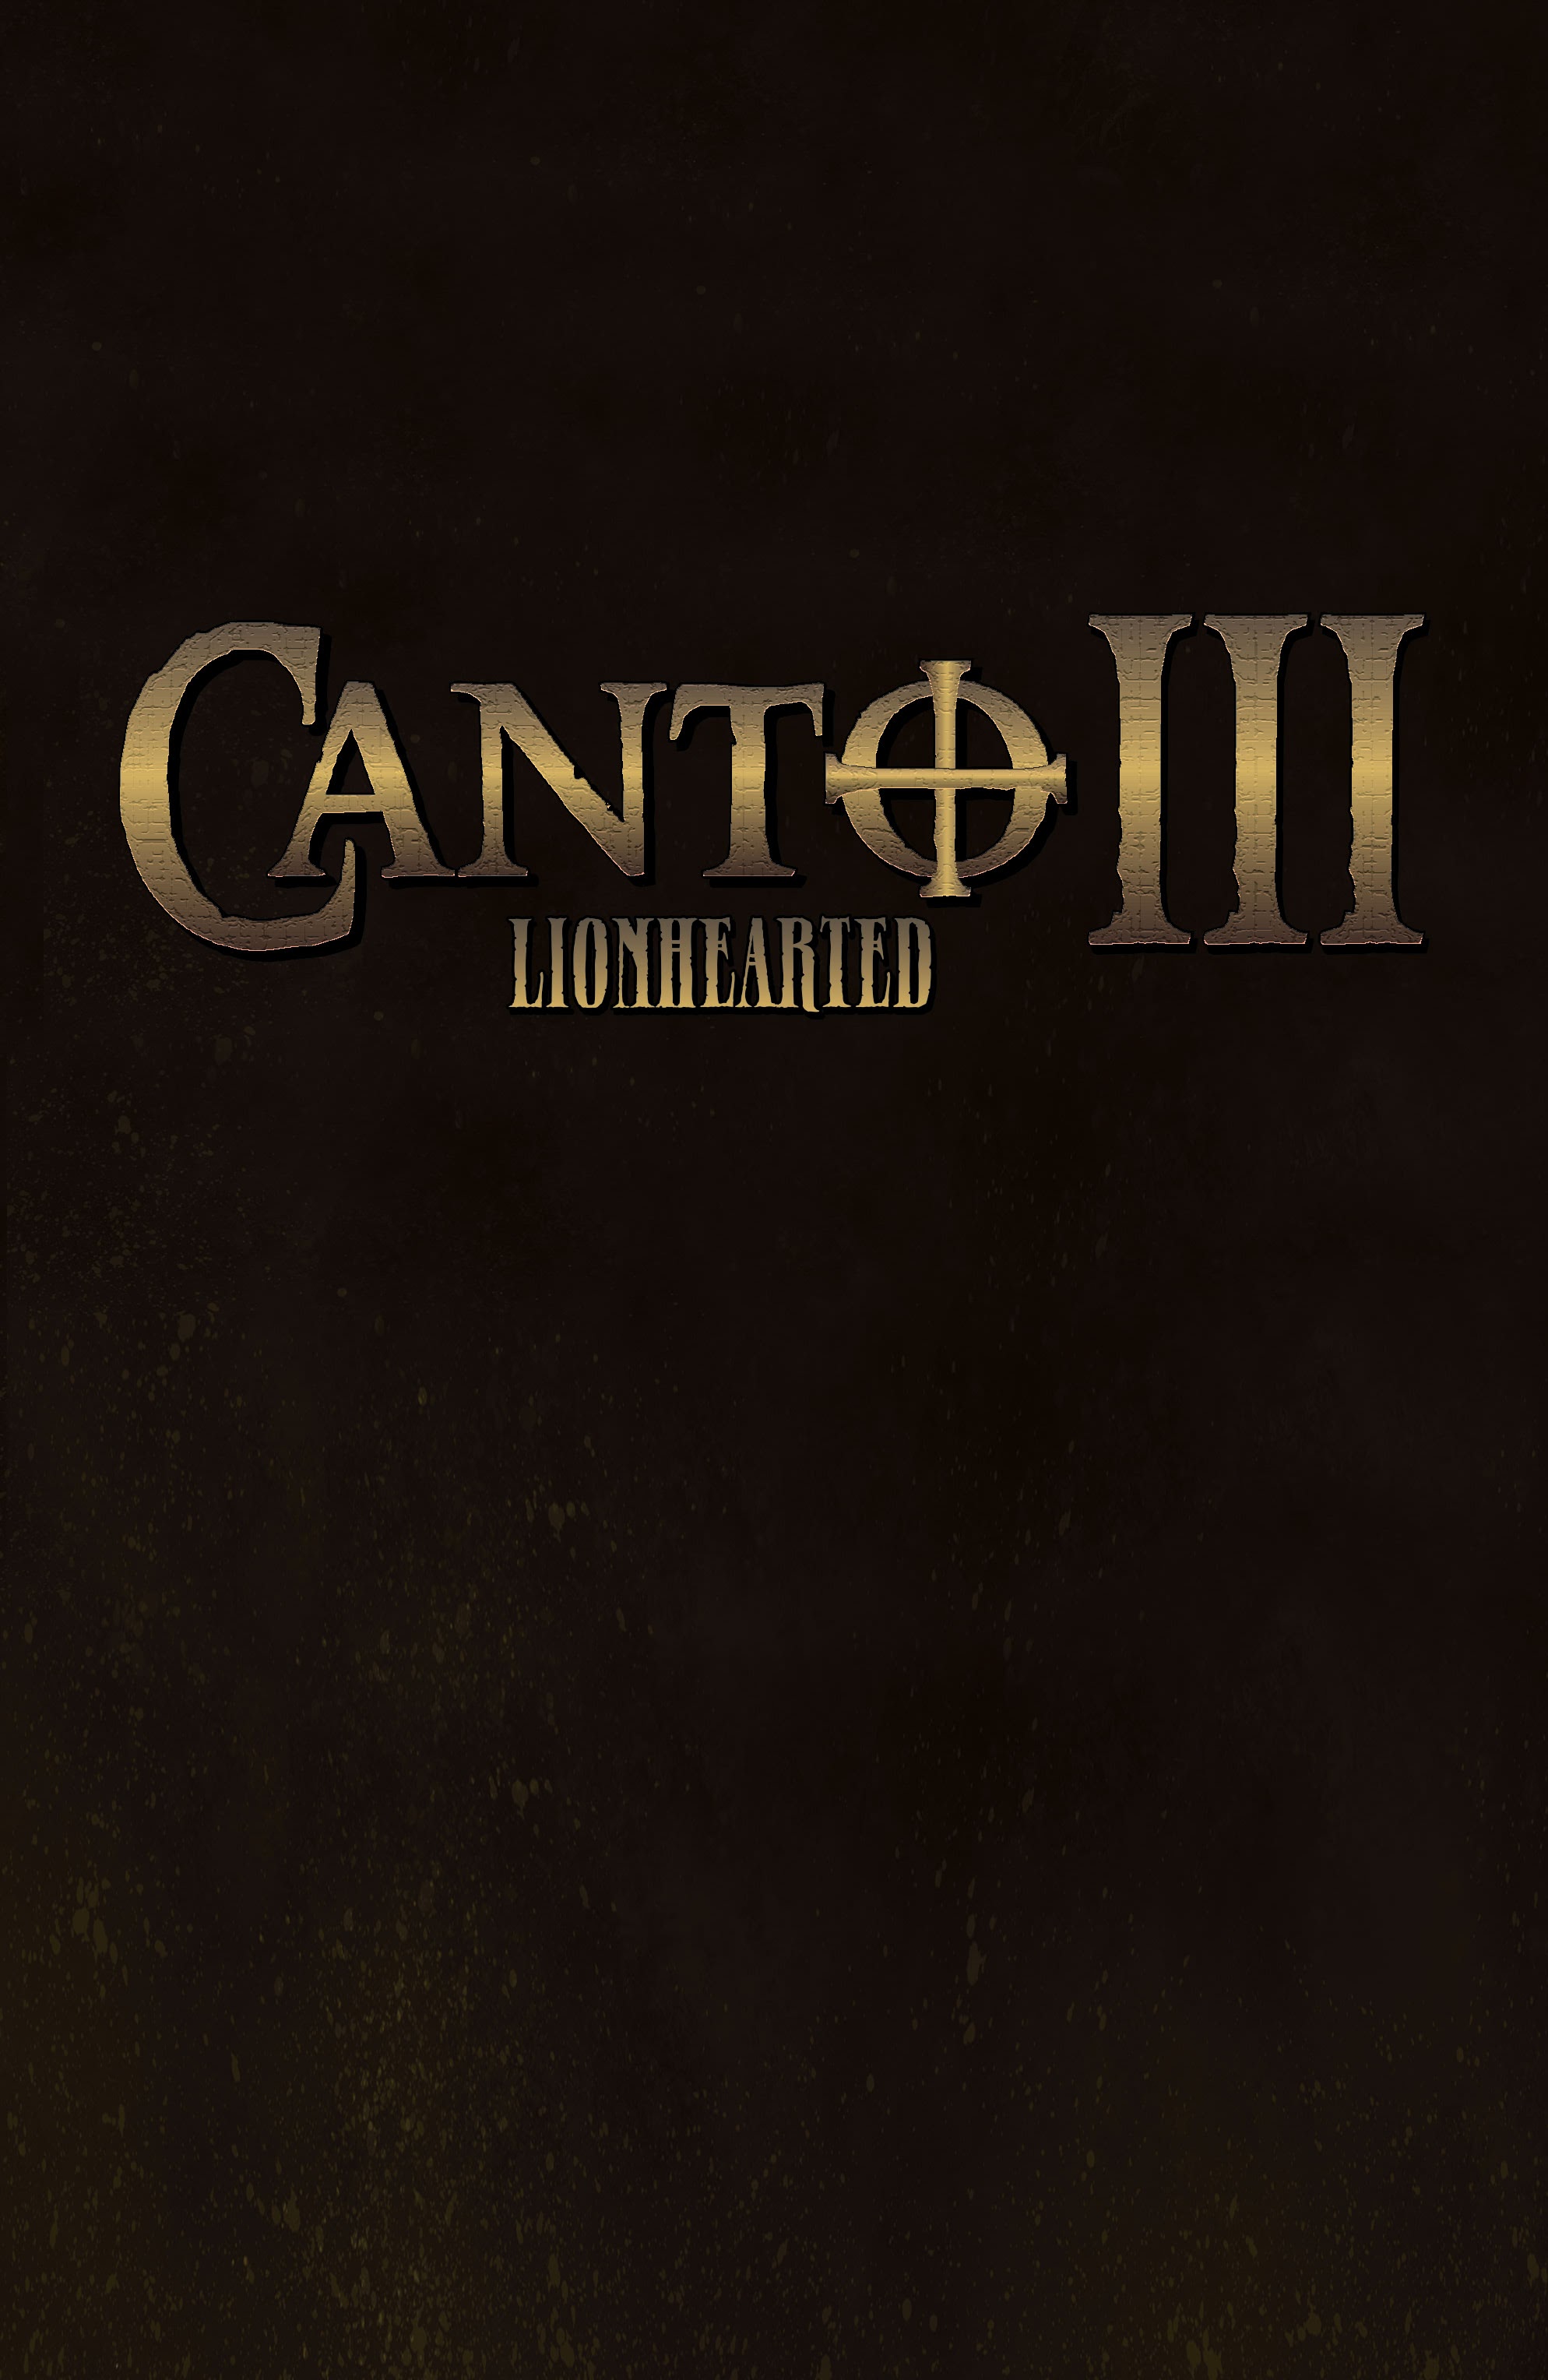 Read online Canto III: Lionhearted comic -  Issue #6 - 25